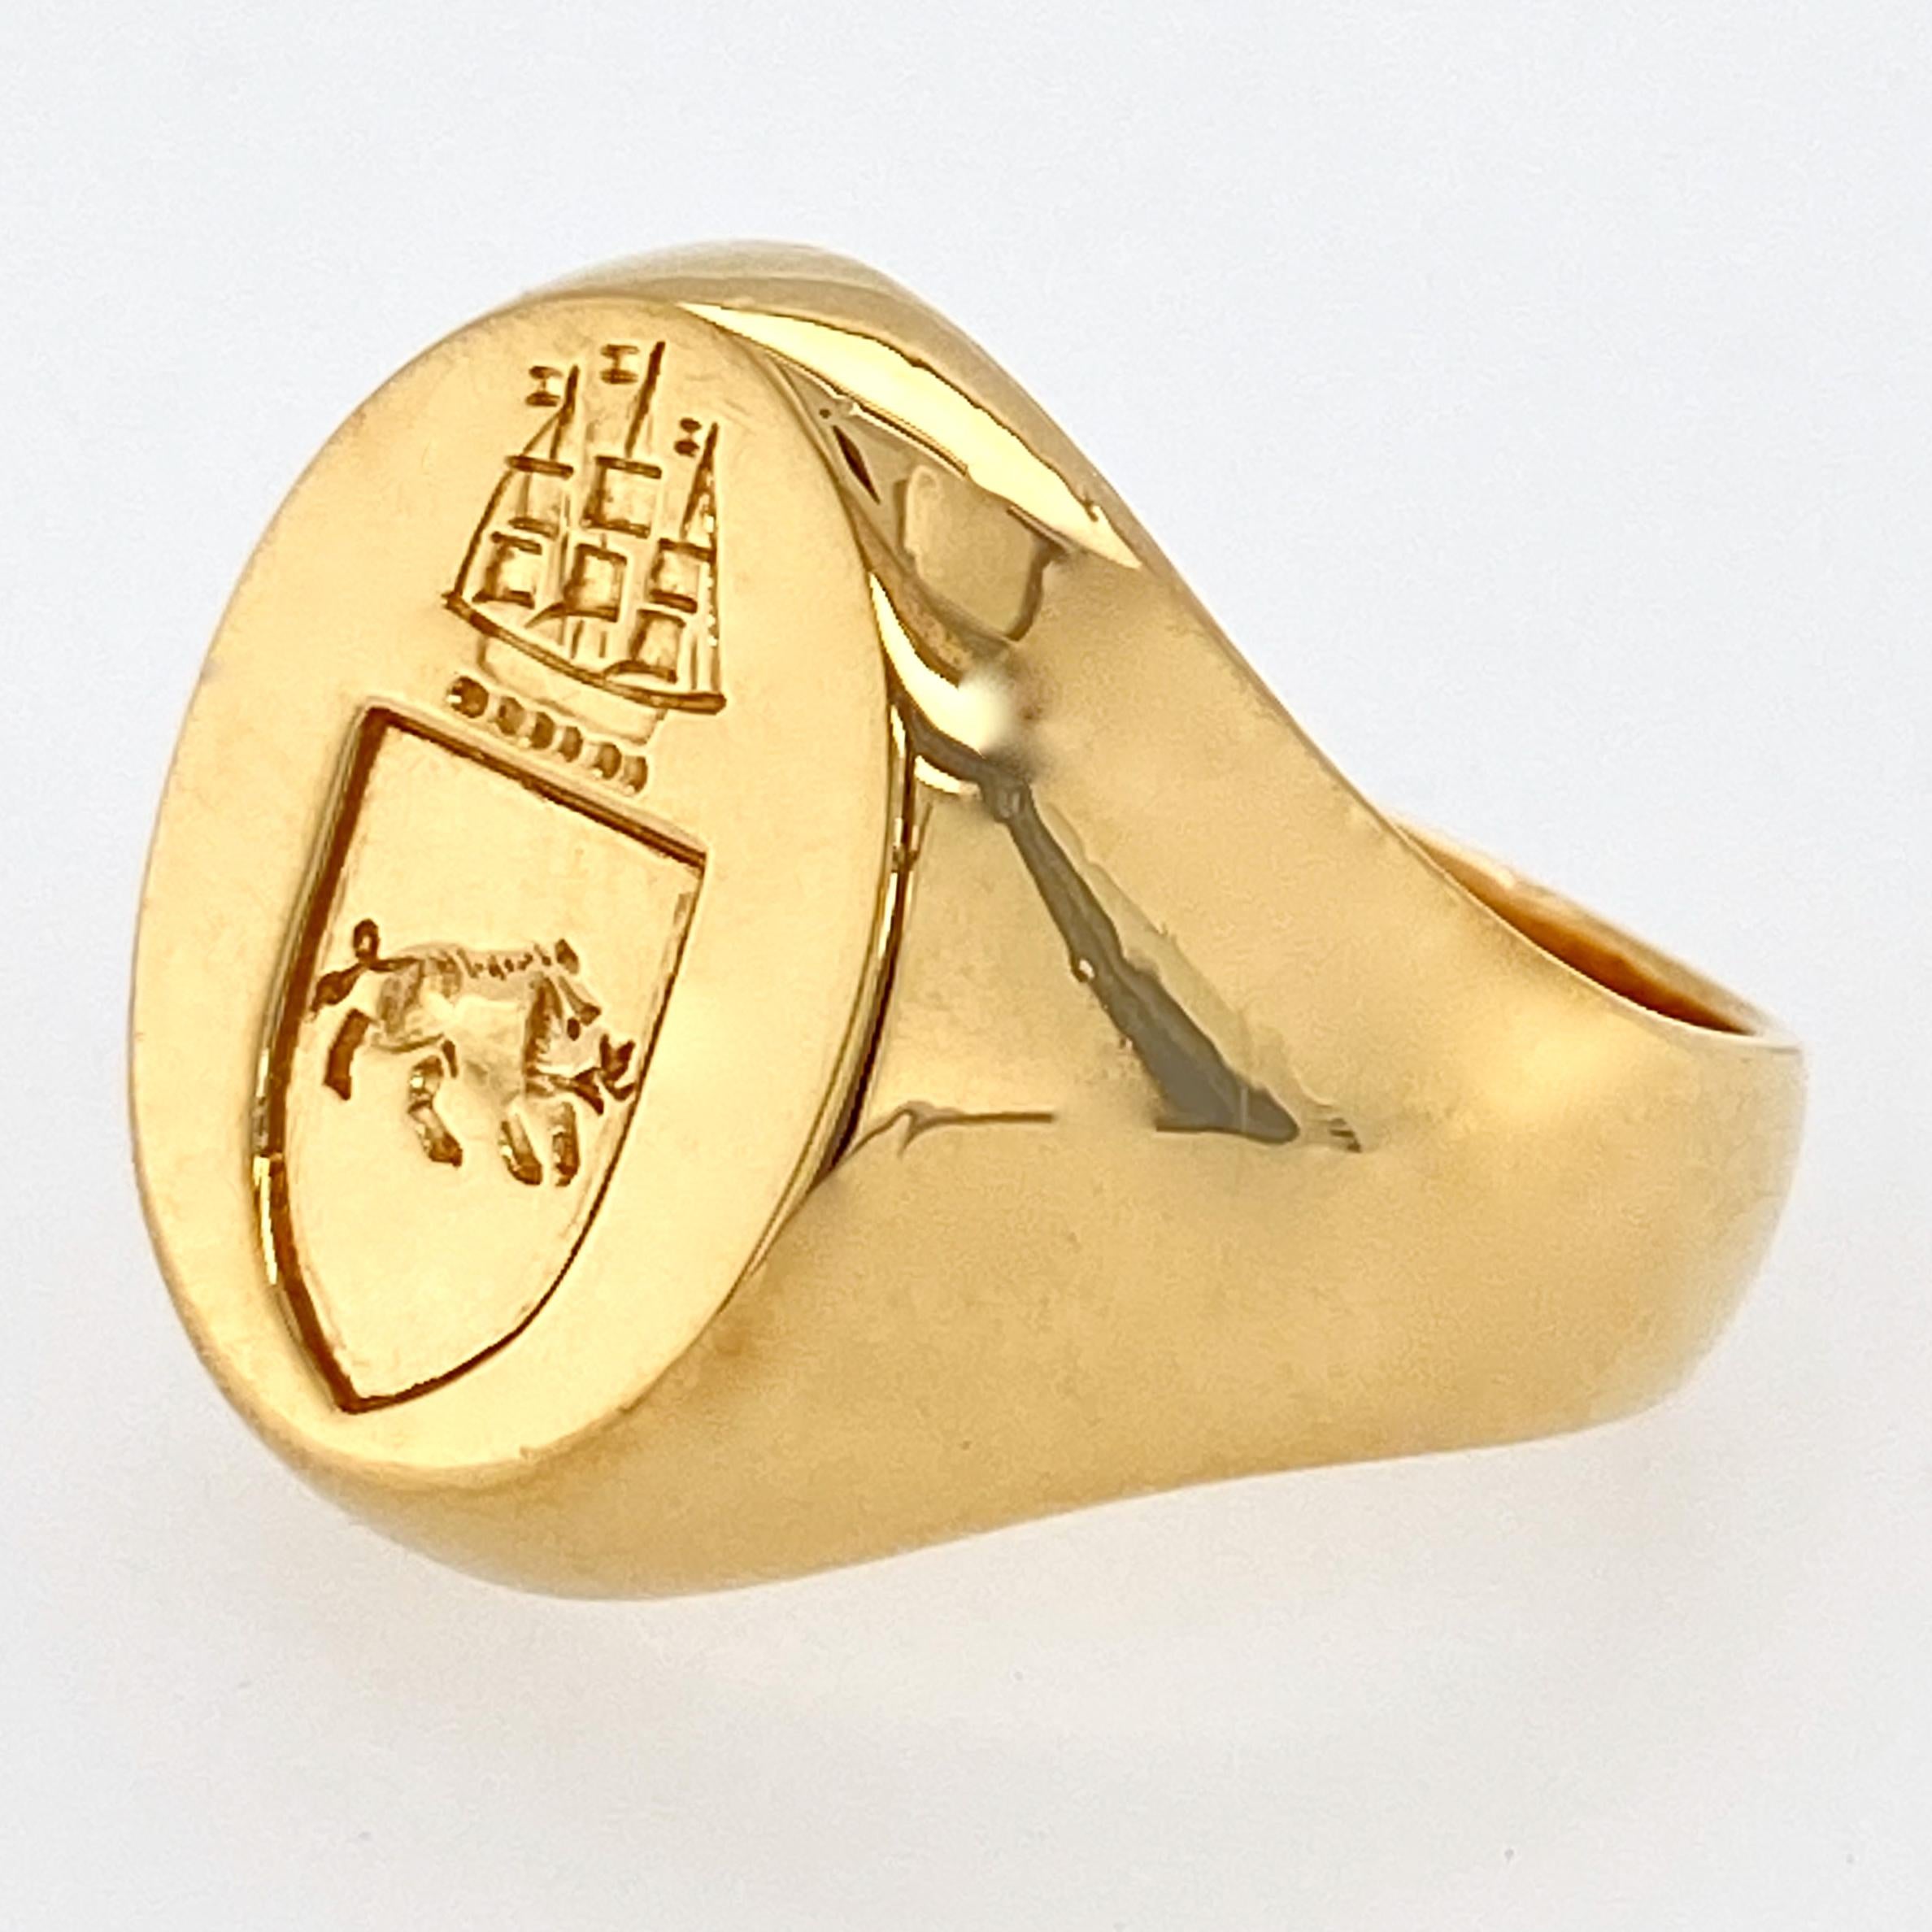 This intriguing signet ring features a wild boar  with curly tail (meaning he's not young) and open mouth (meaning he's rude) walking to the right inside of a shield.  Above the boar is a three-masted ship.

The boar in heraldry symbolizes bravery,